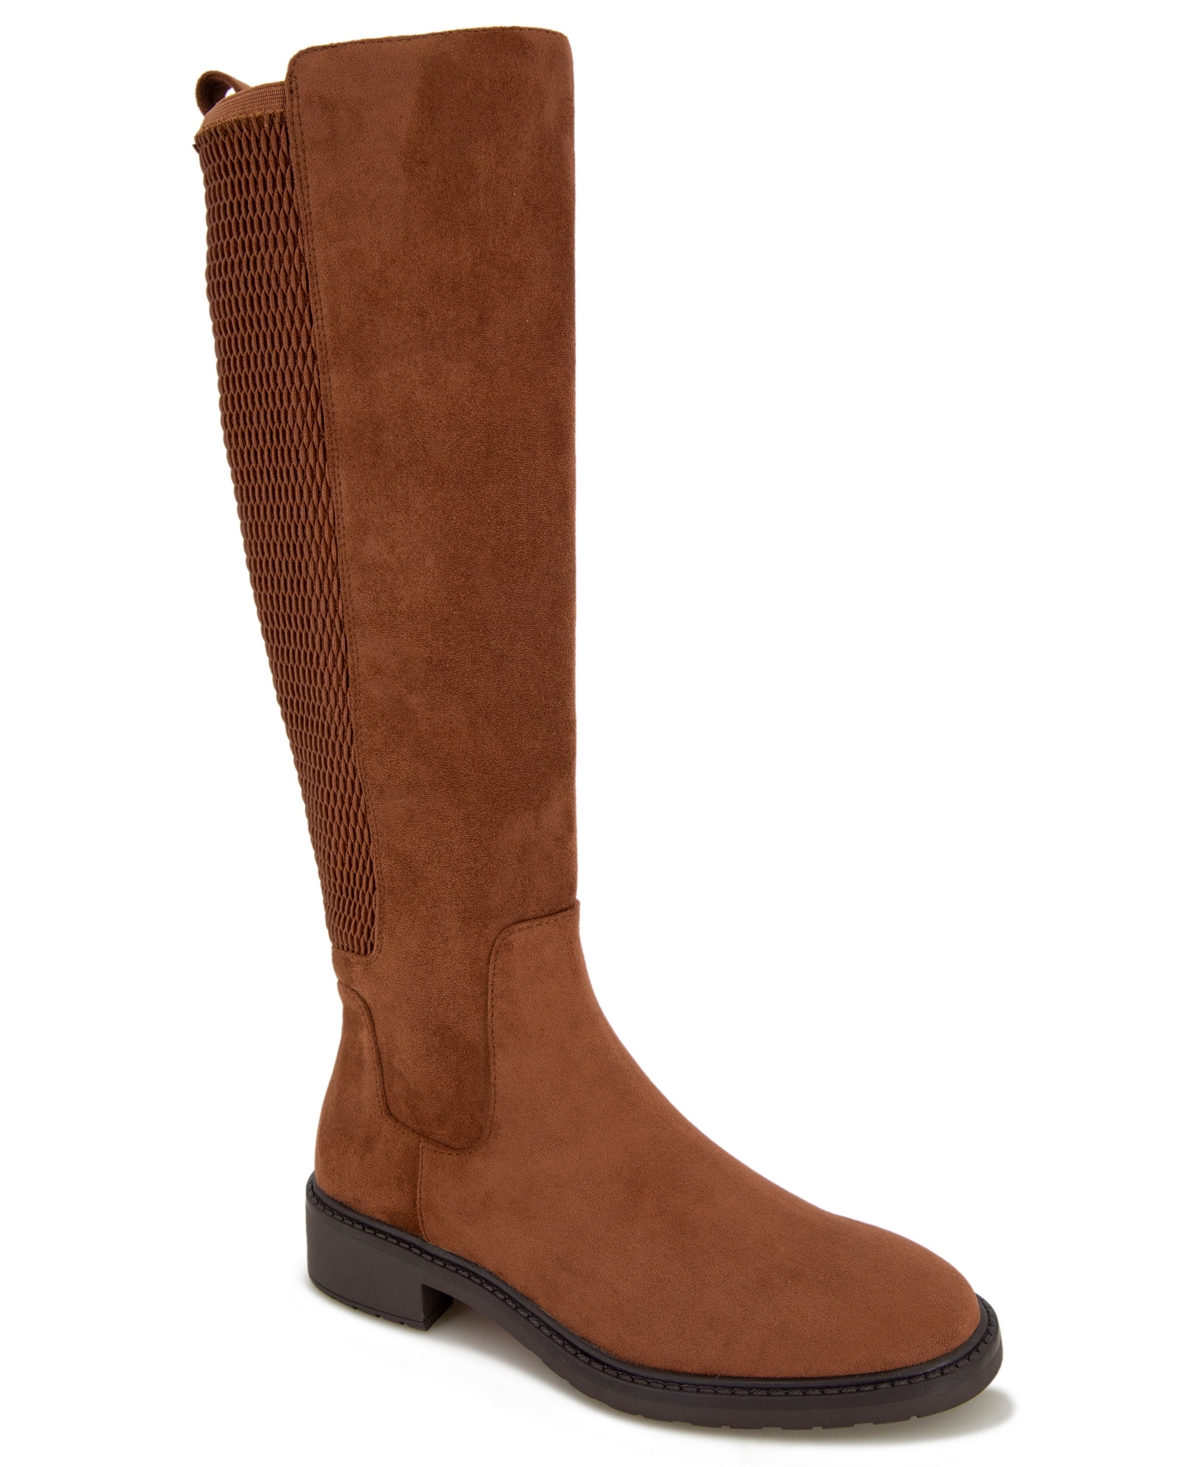 Women's Lionel Tall Boots - Caramel Cafe